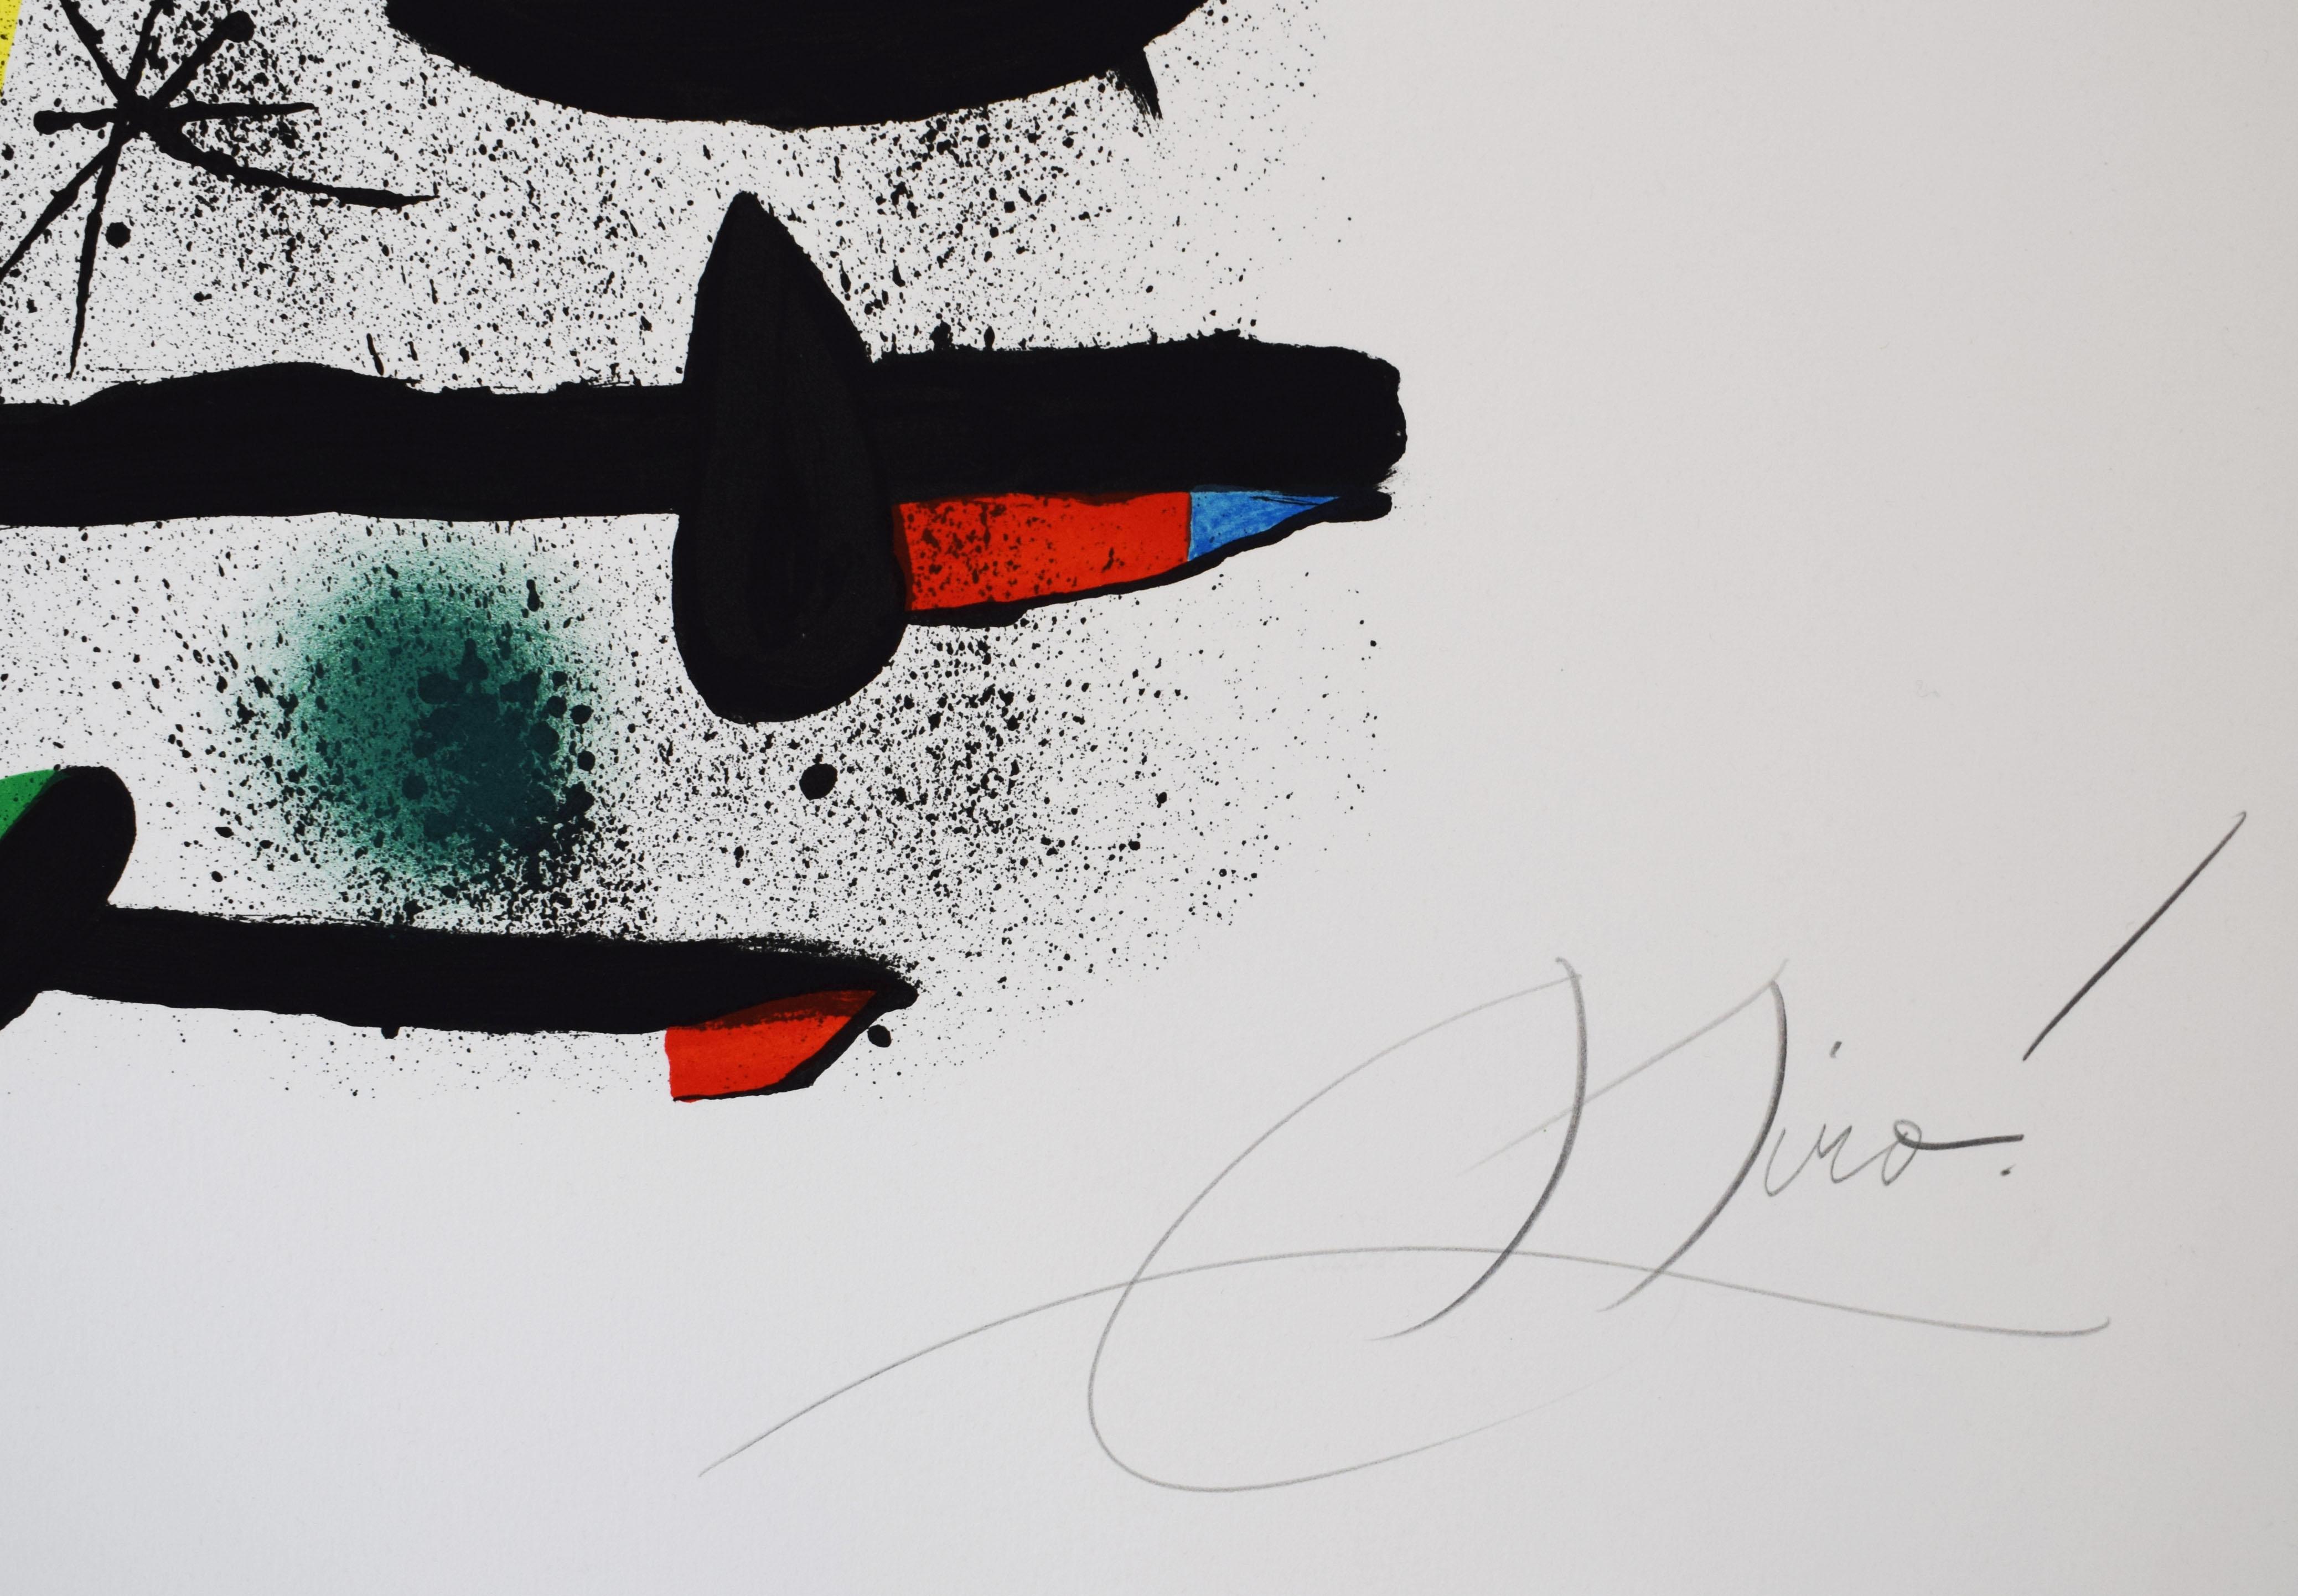 The Lover’s Sled, from: Allegro Vivace - Spanish Surrealism Musical Inspiration - Surrealist Print by Joan Miró